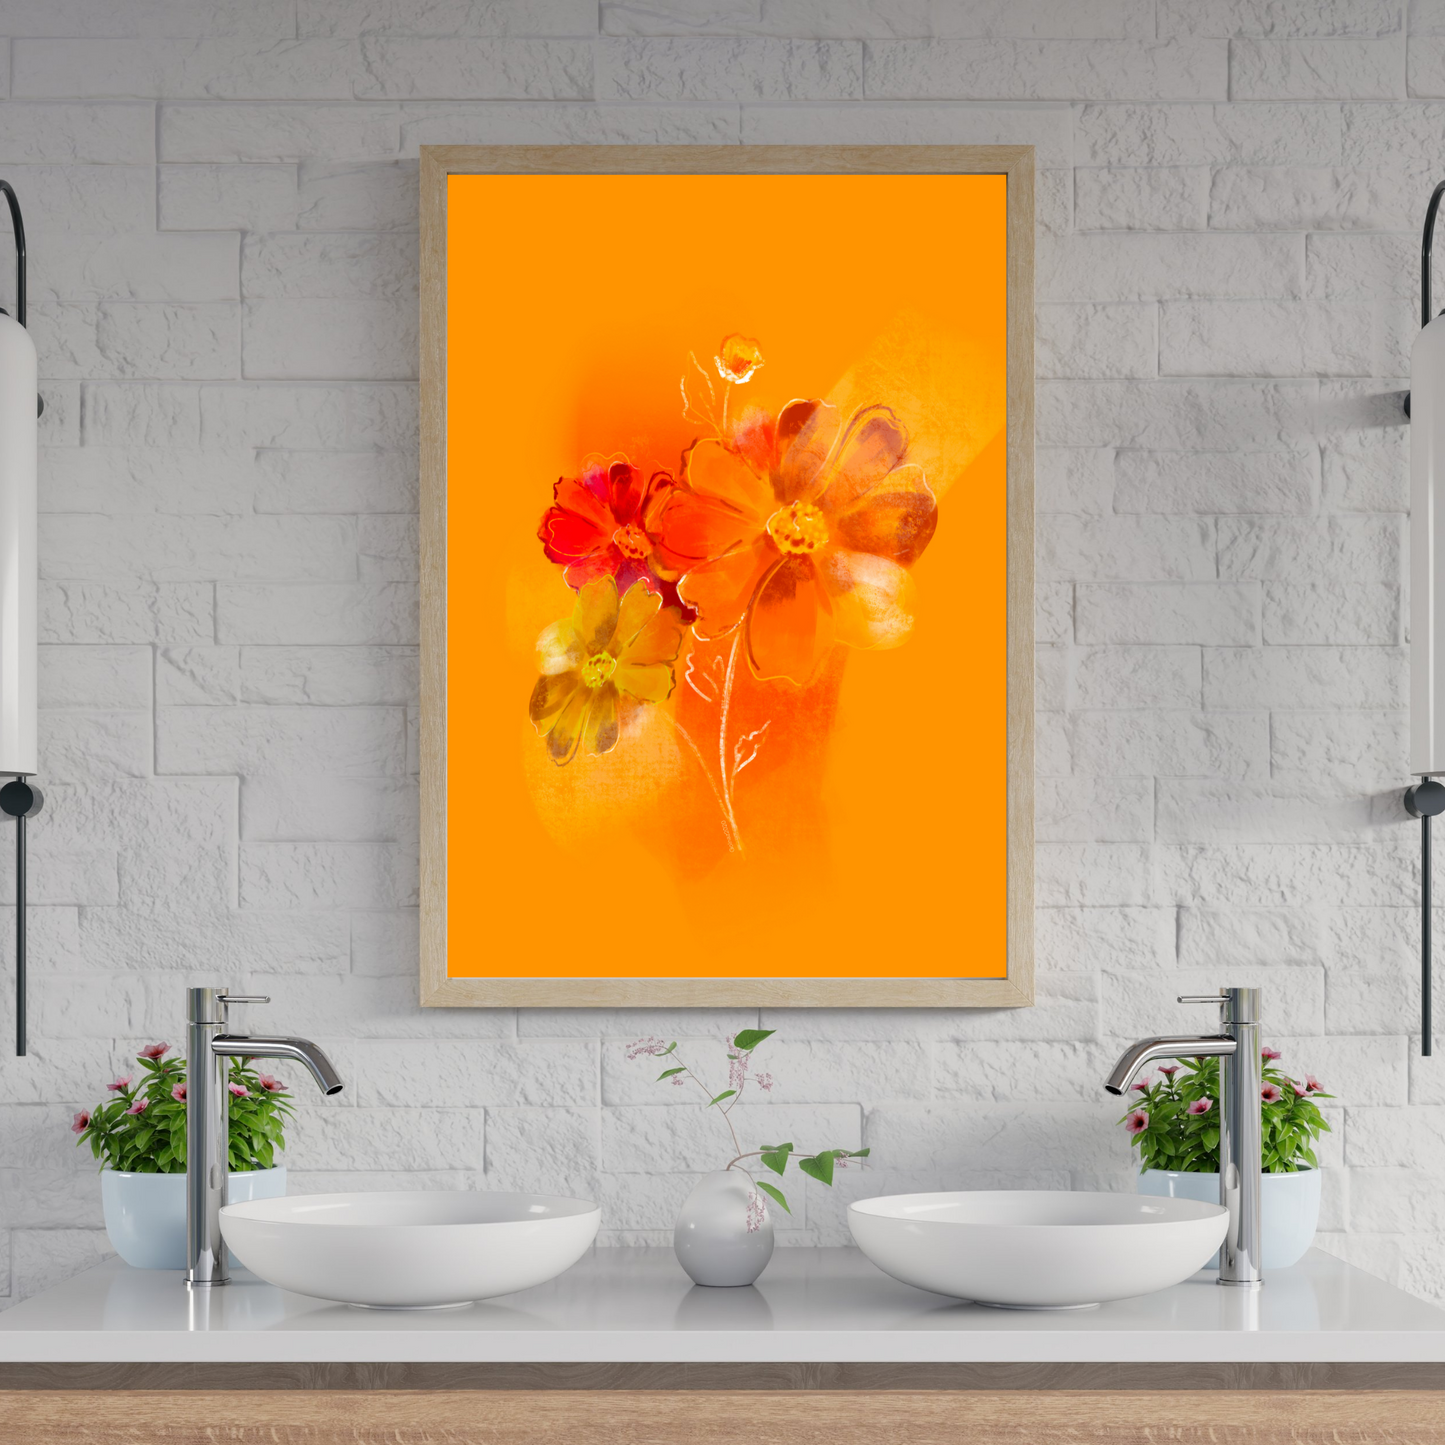 An example of the Cosmos painting by ArisaTeam in a bathroom